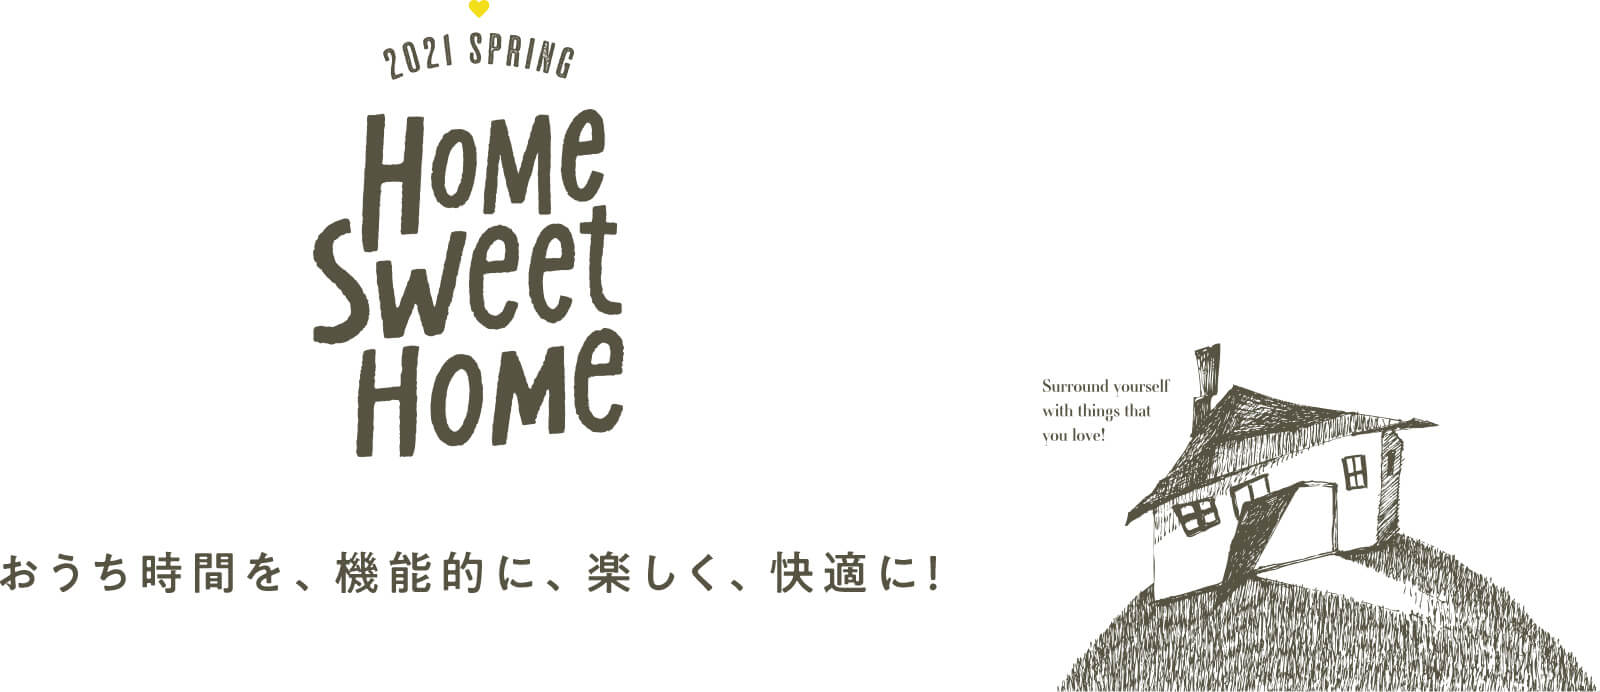 2021 SPRING HOME SWEET HOME おうち時間を、機能的に、楽しく、快適に！